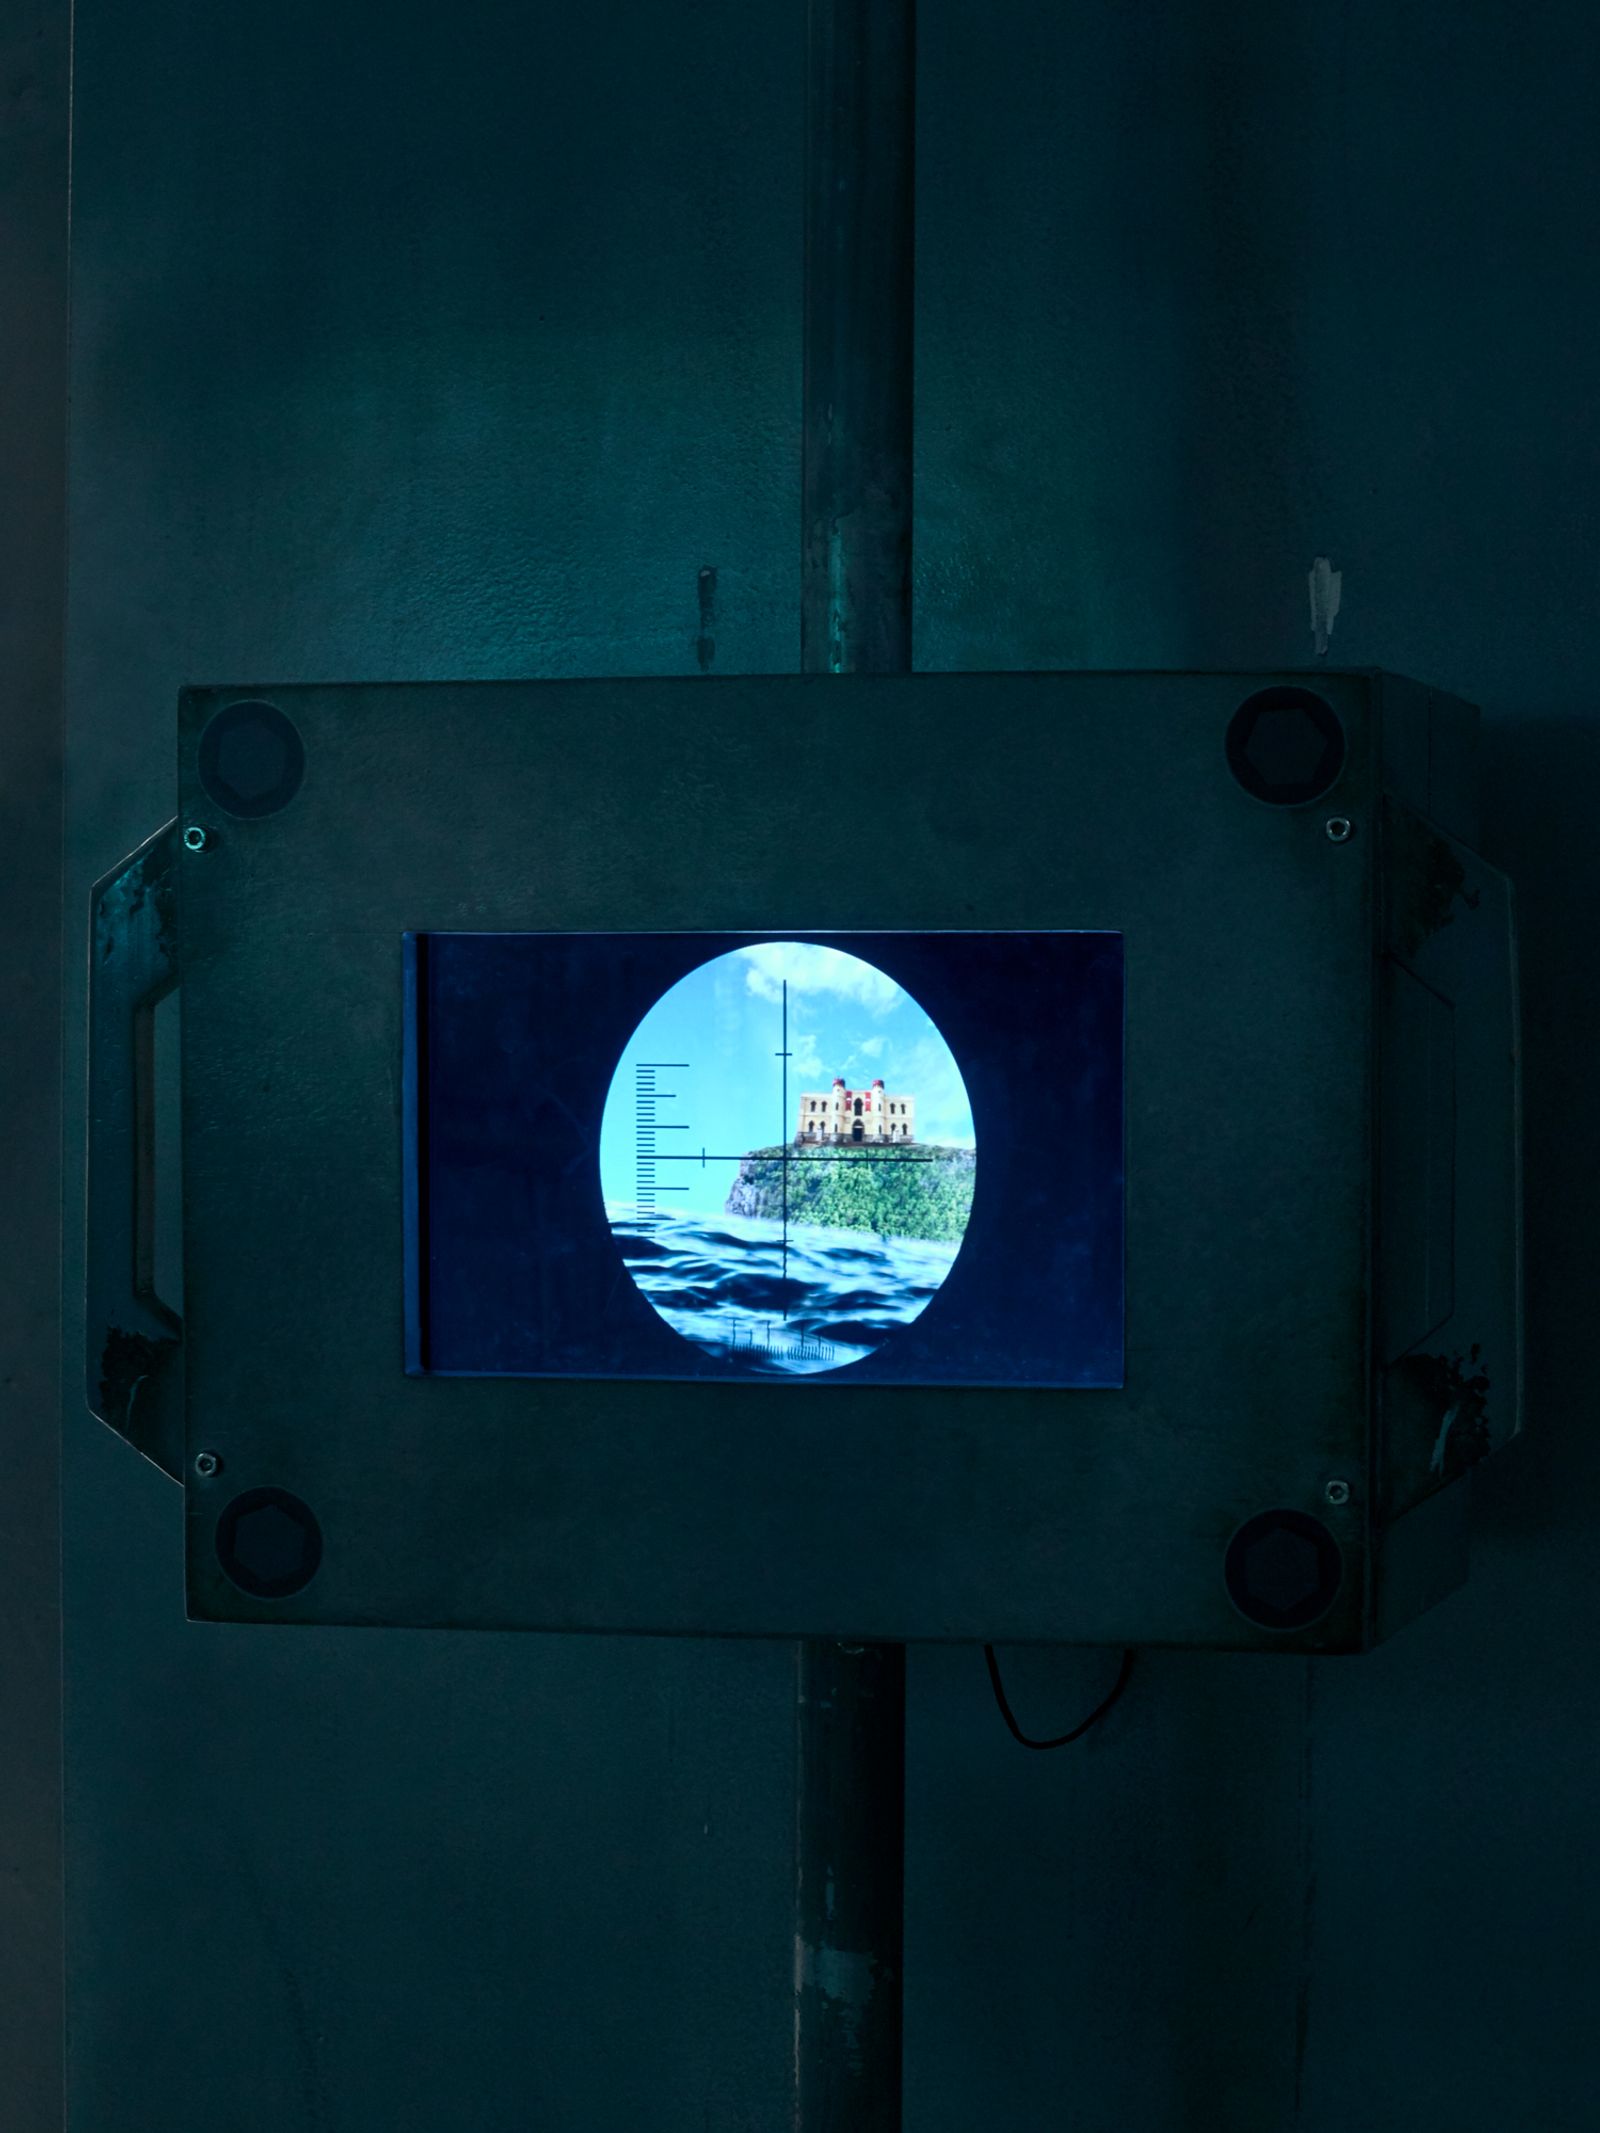 © Joel Jimenez - Simulation of a submarine periscope with an animated display showcasing the Children’s Museum of Costa Rica on an island.